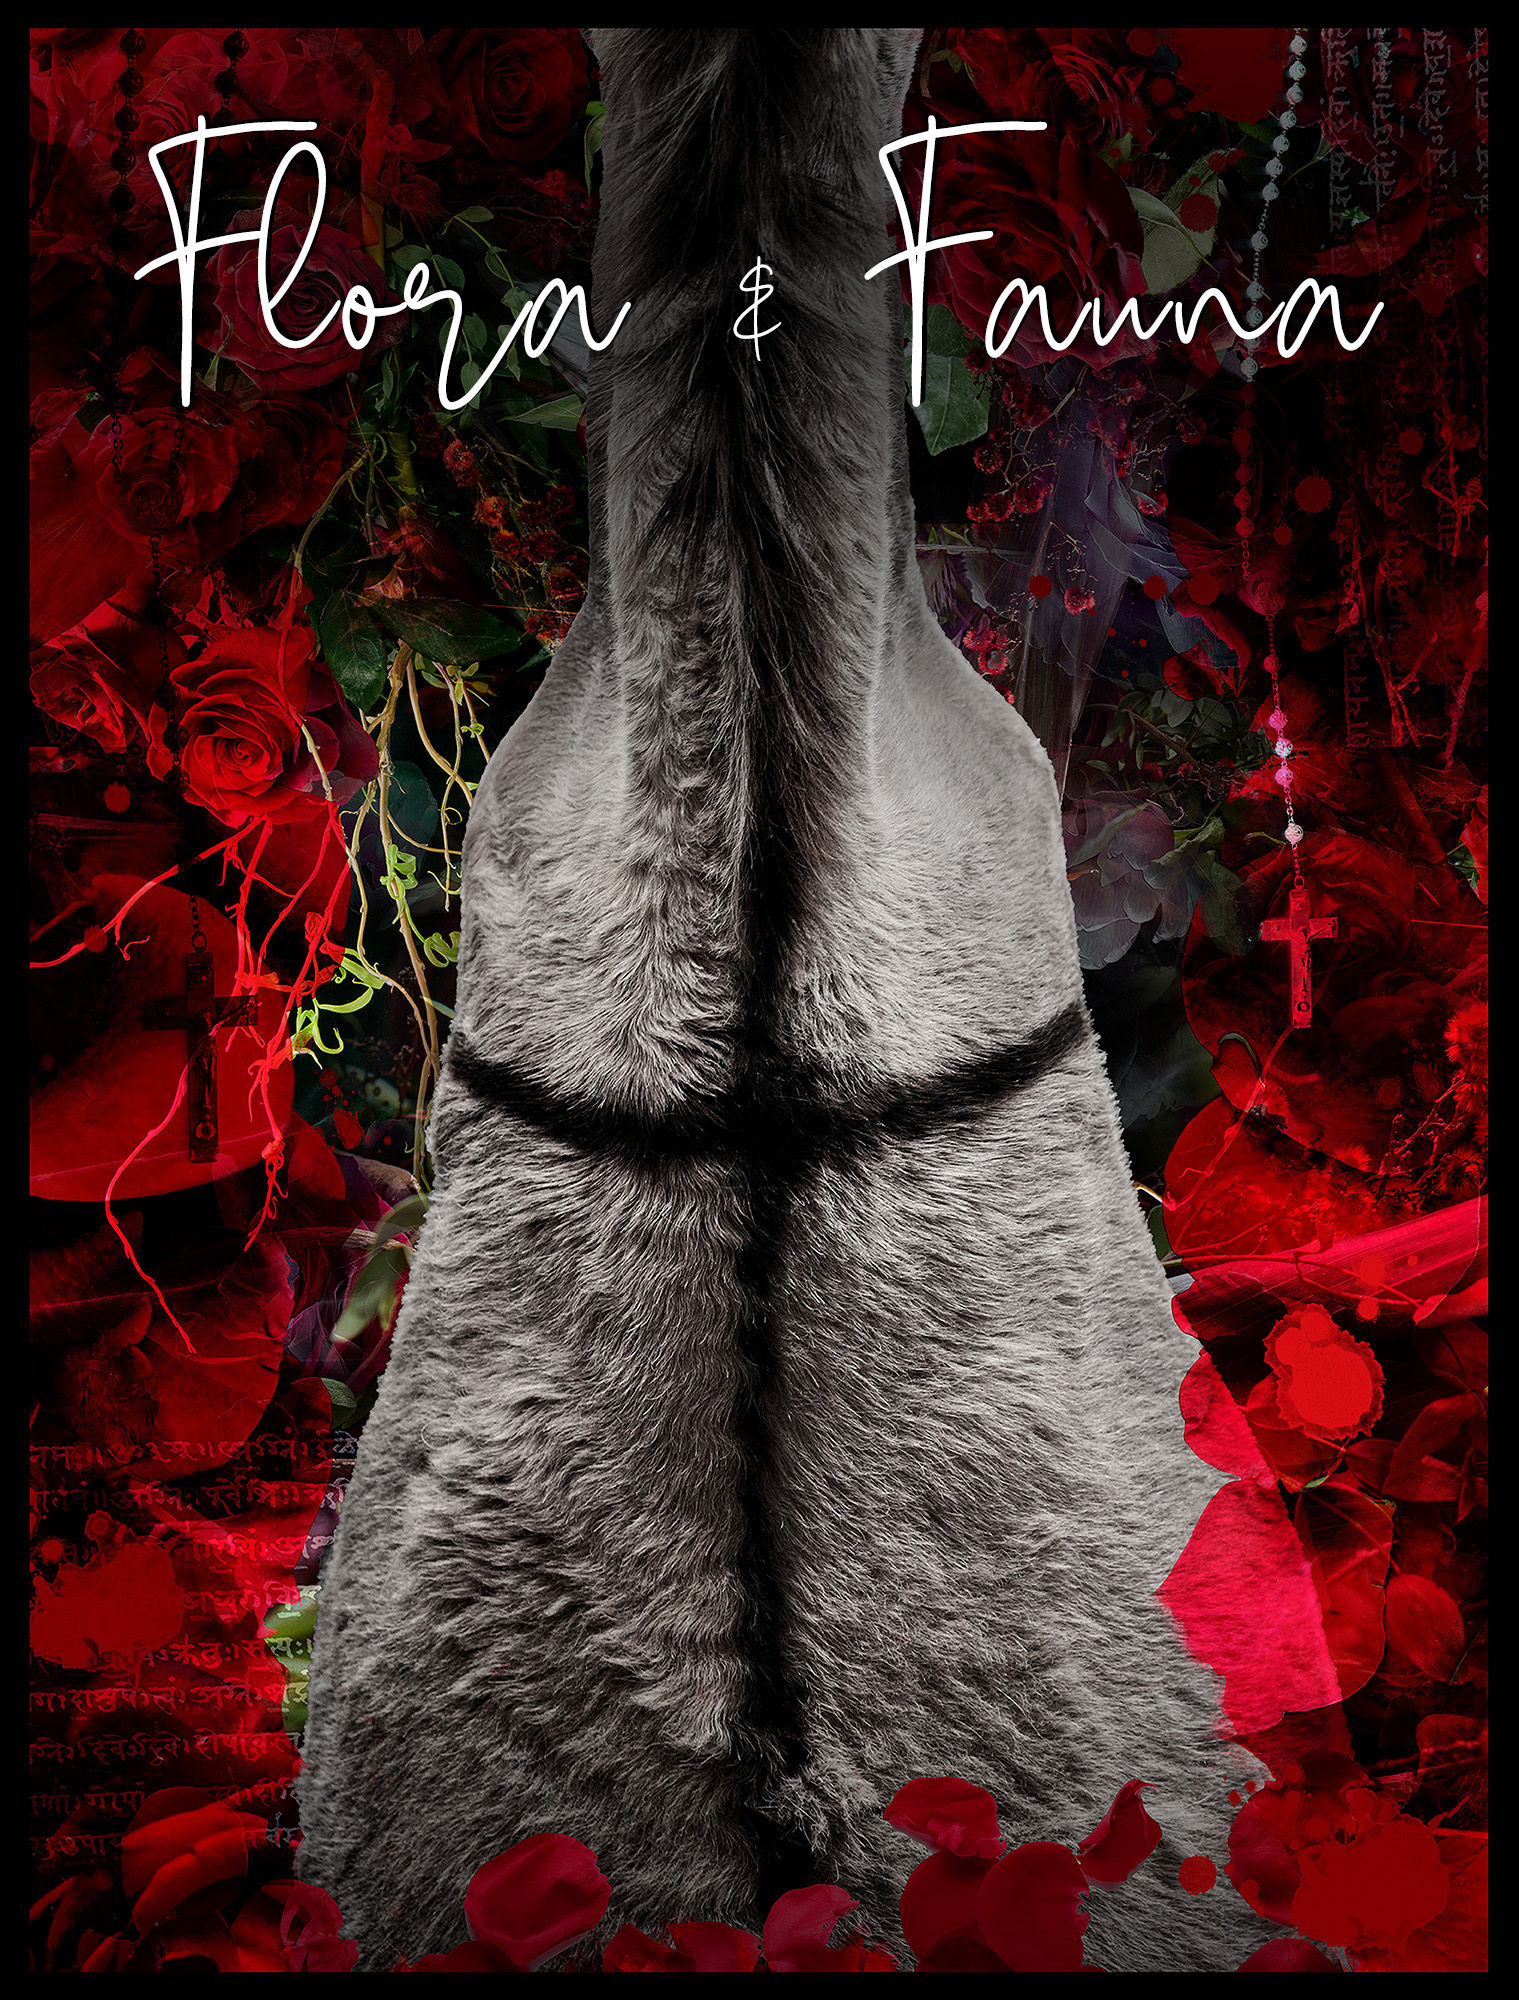 VIEW THE FLORA & FAUNA COLLECTION